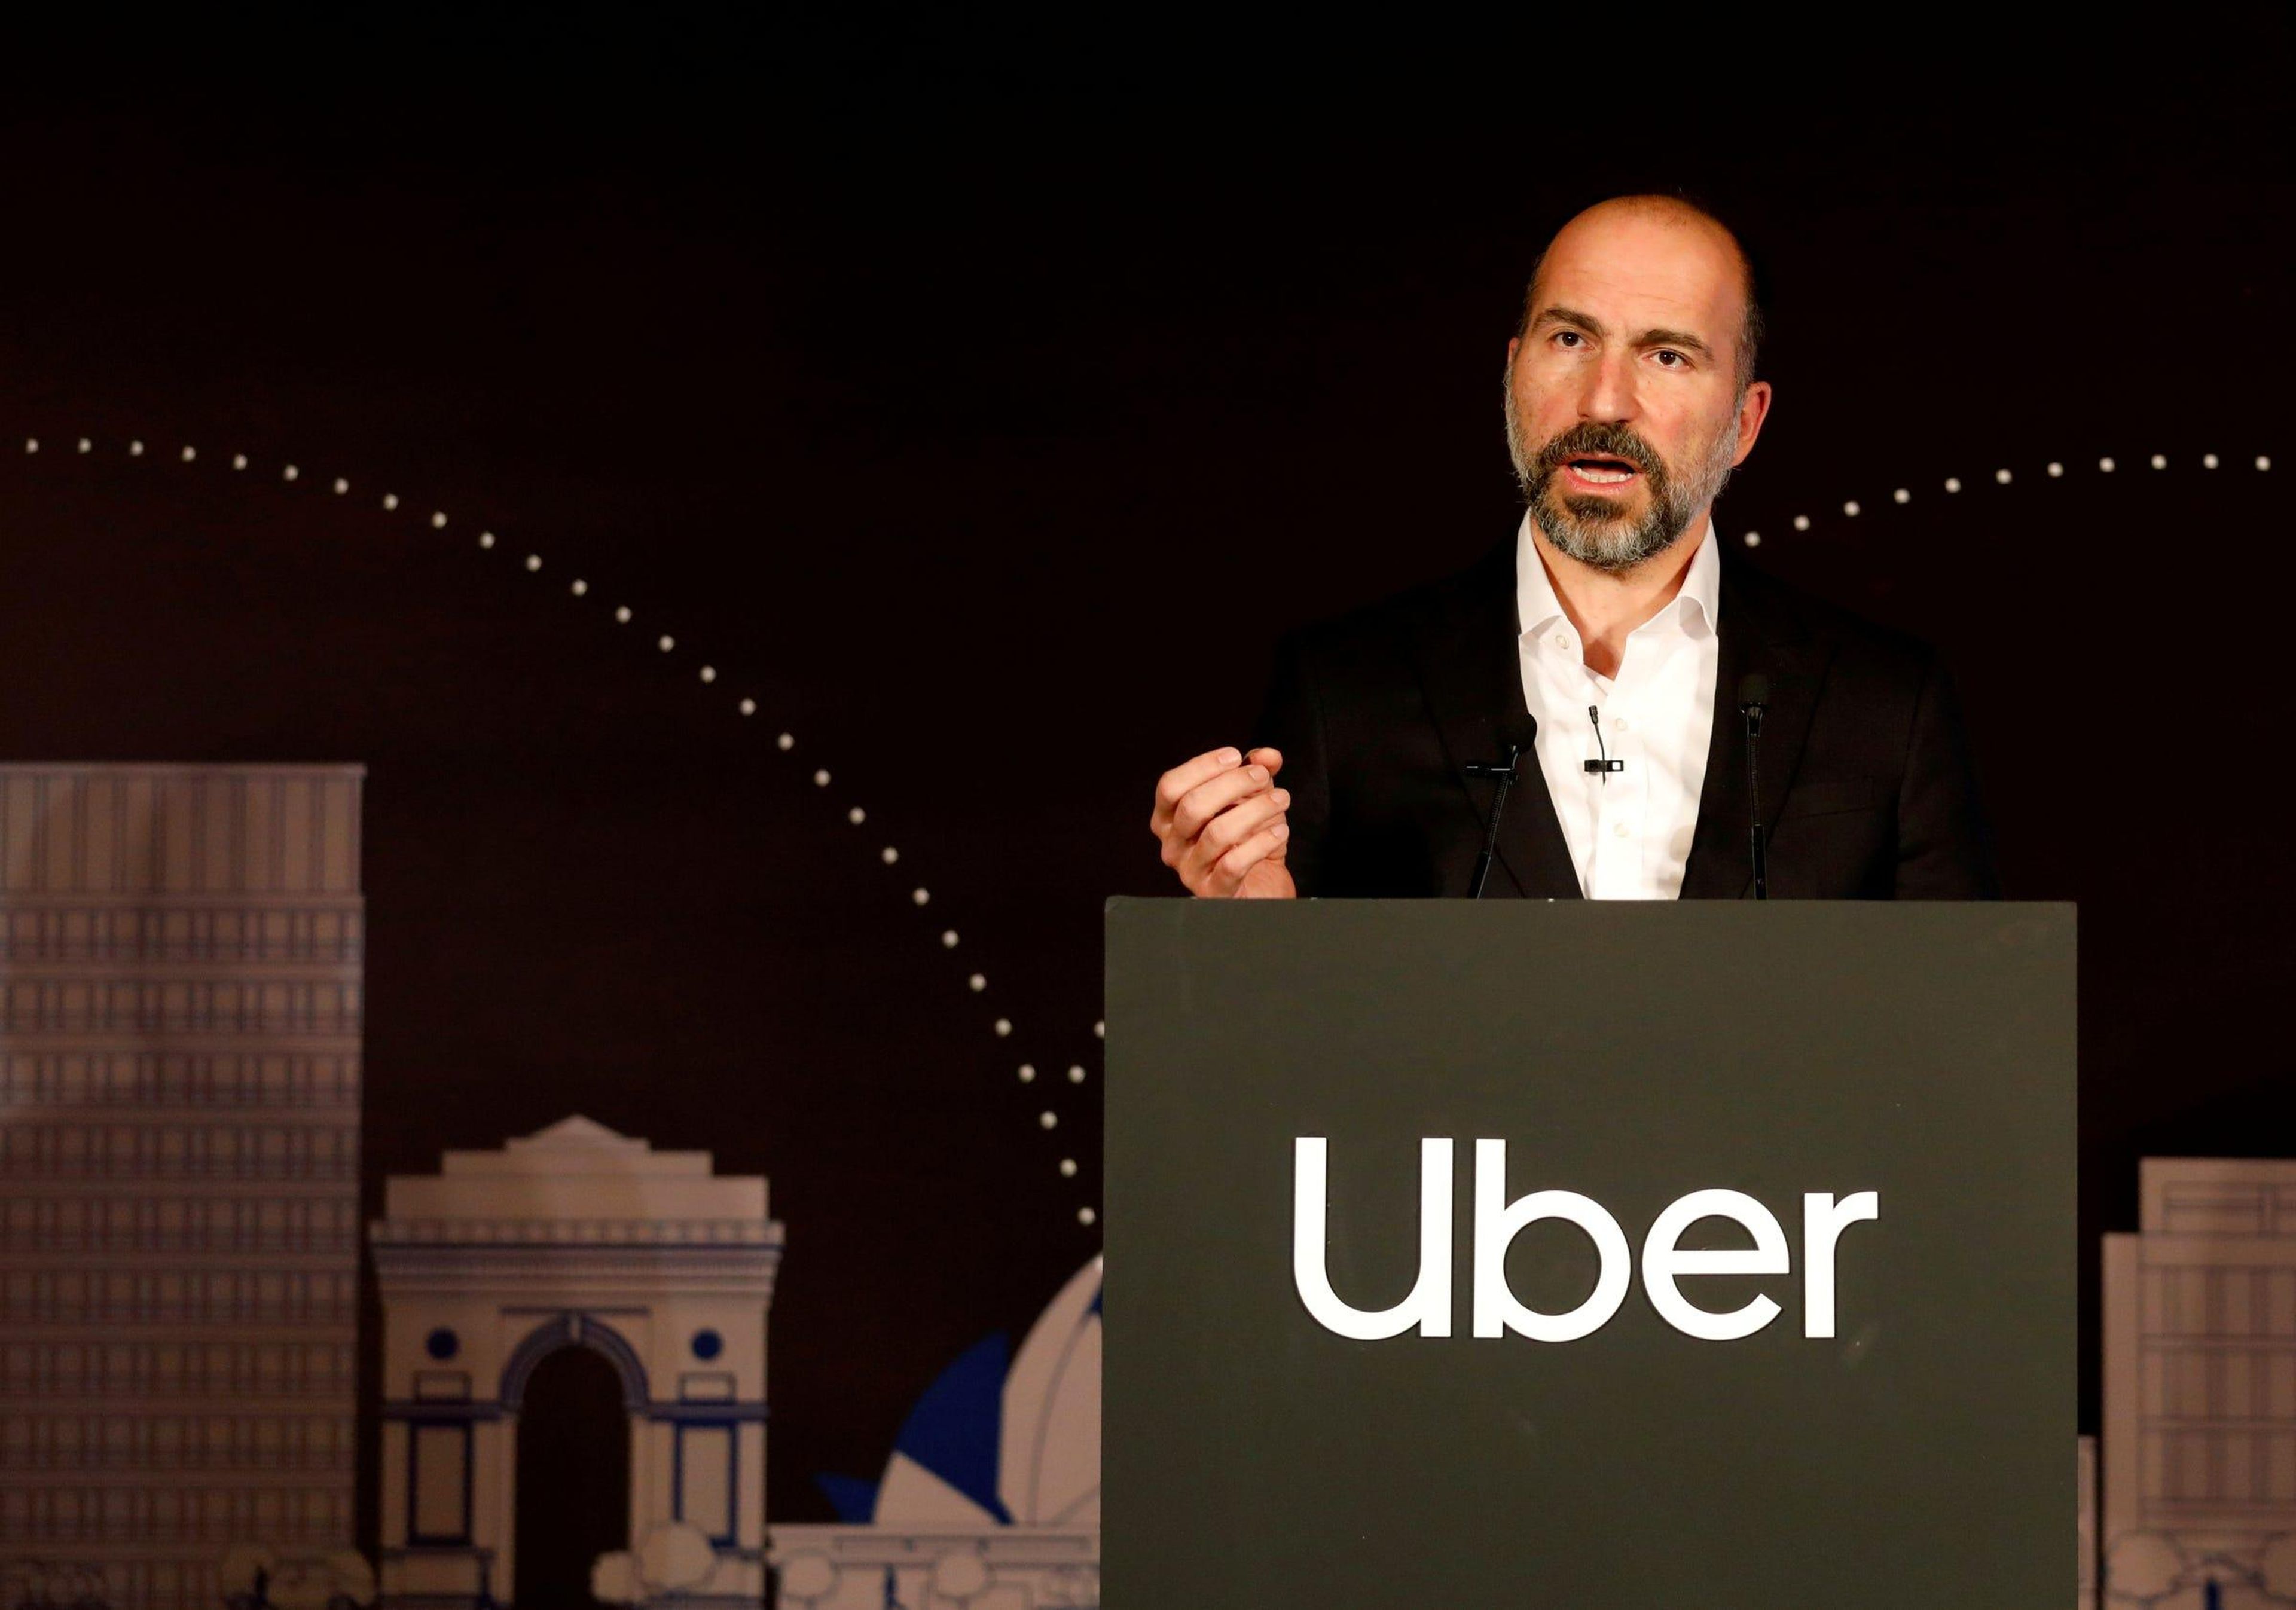 Uber CEO Dara Khosrowshahi speaks to the media at an event in New Delhi, India